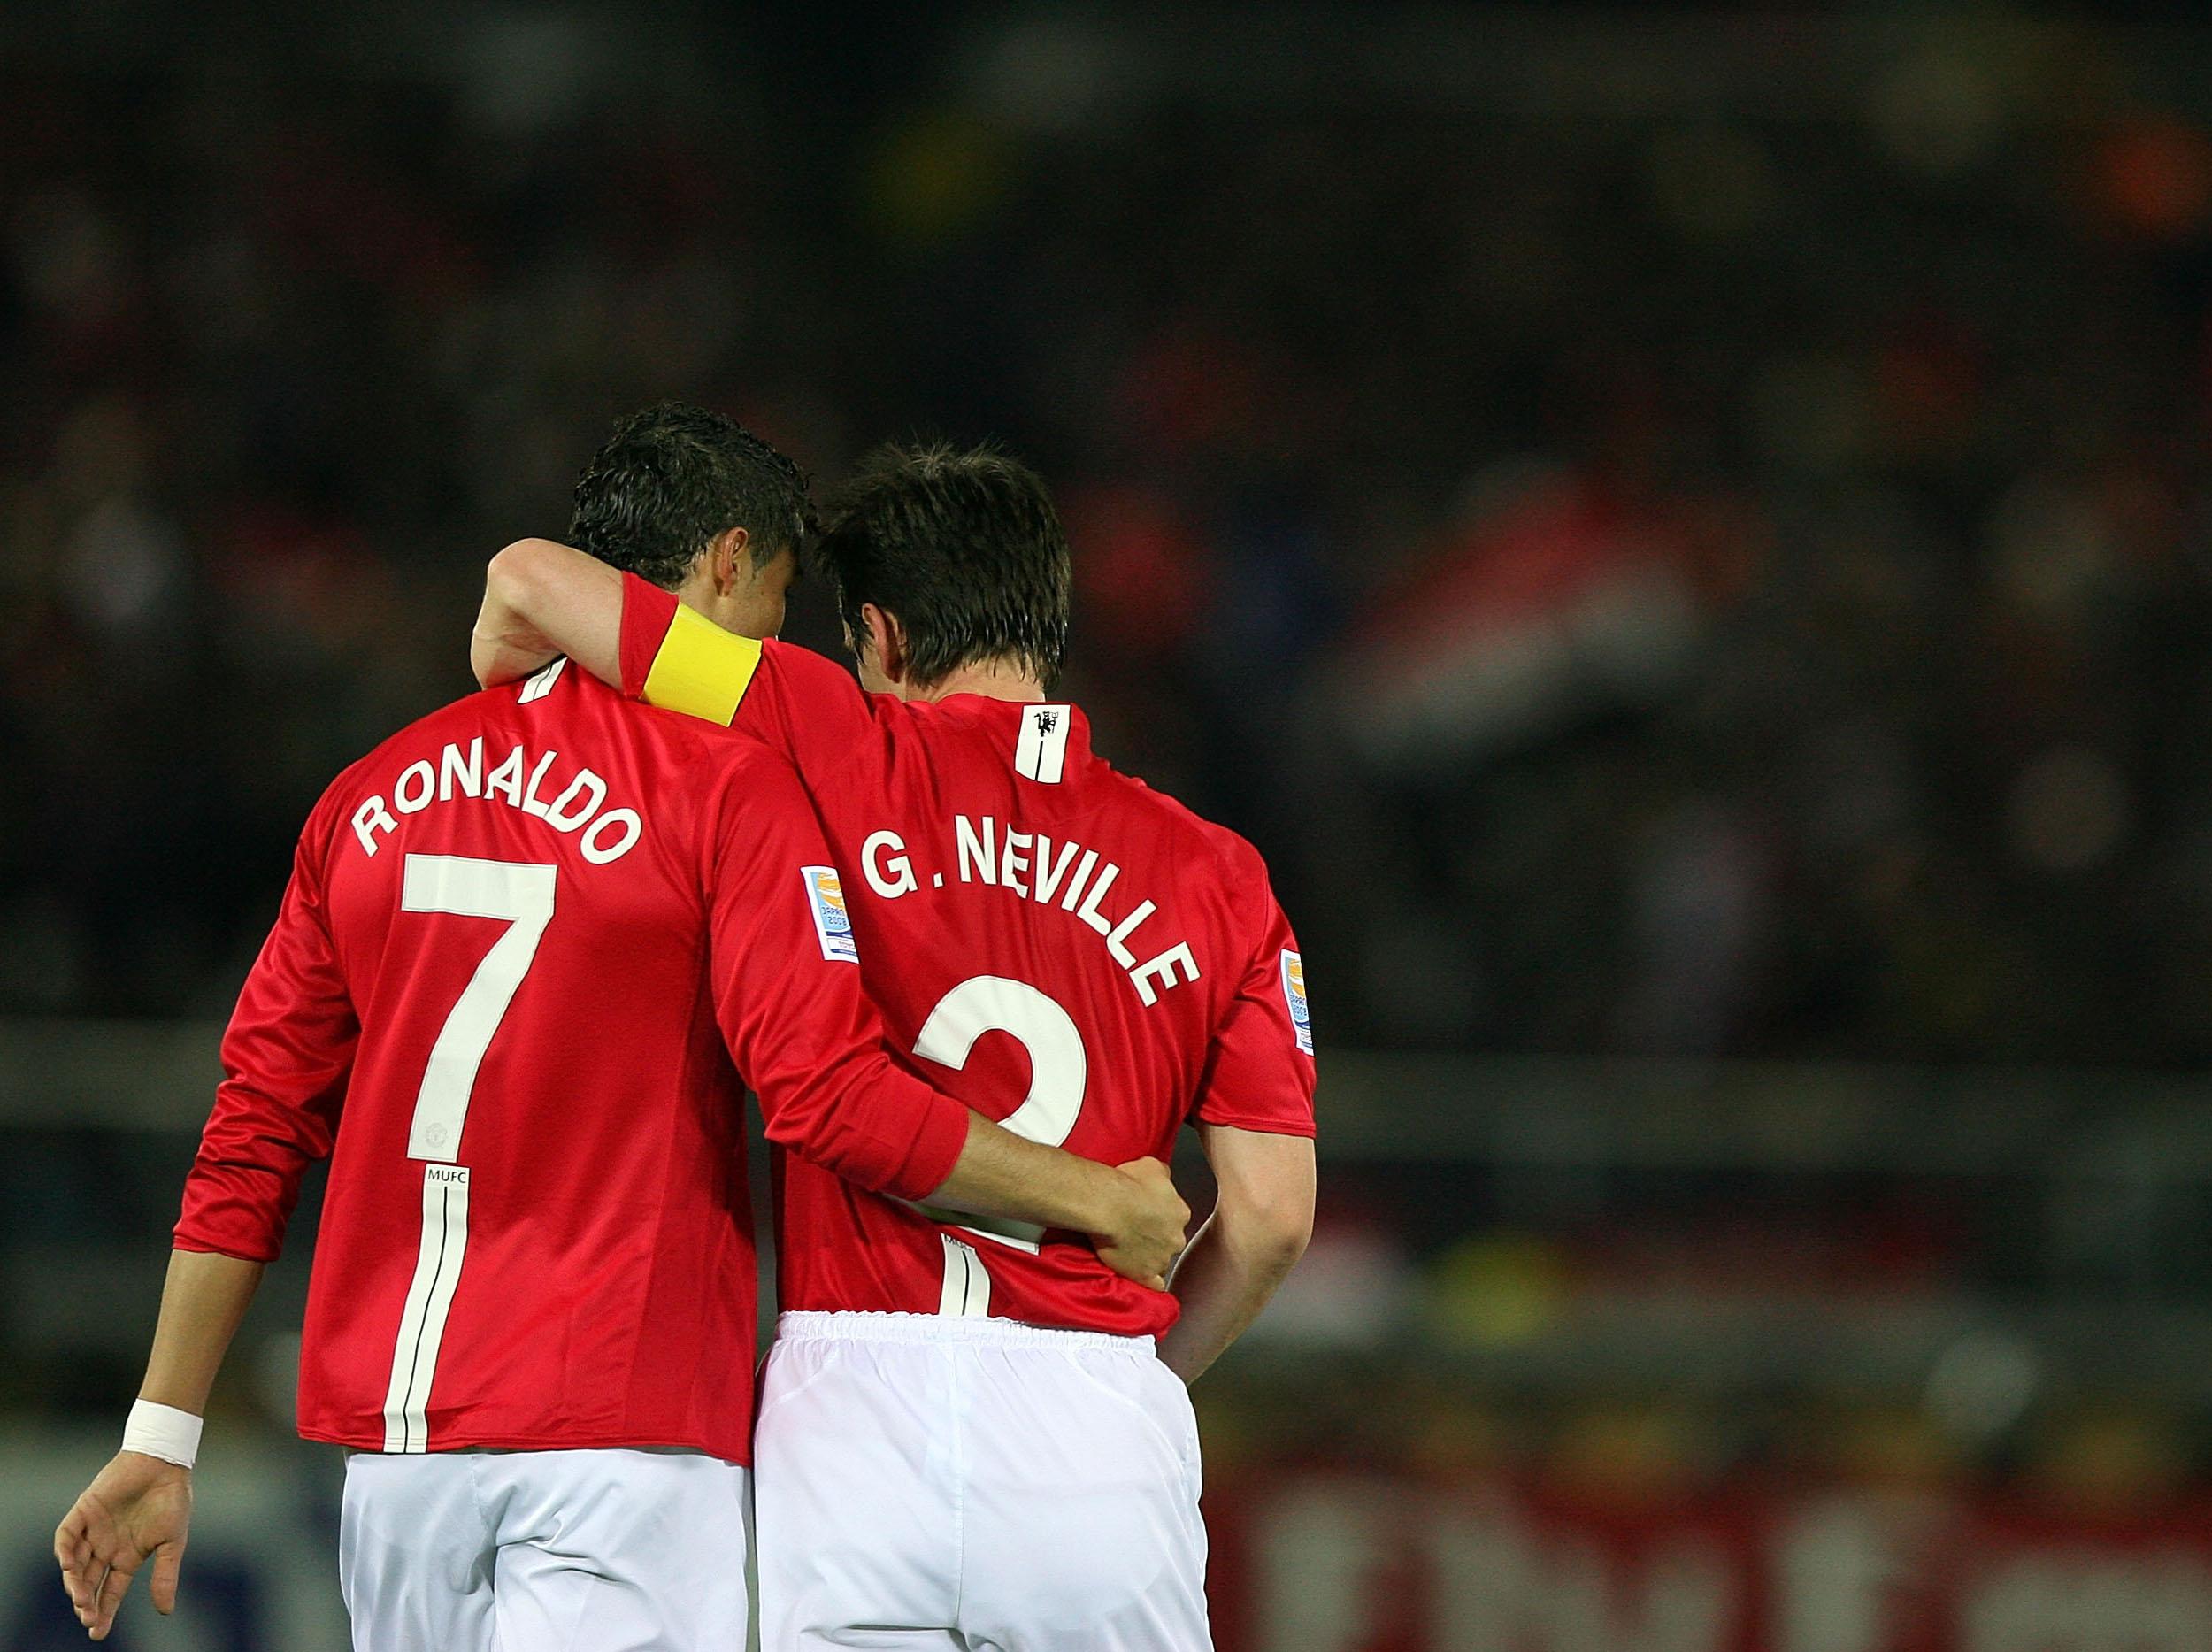 Gary Neville watched Cristiano Ronaldo transform in his time at Old Trafford